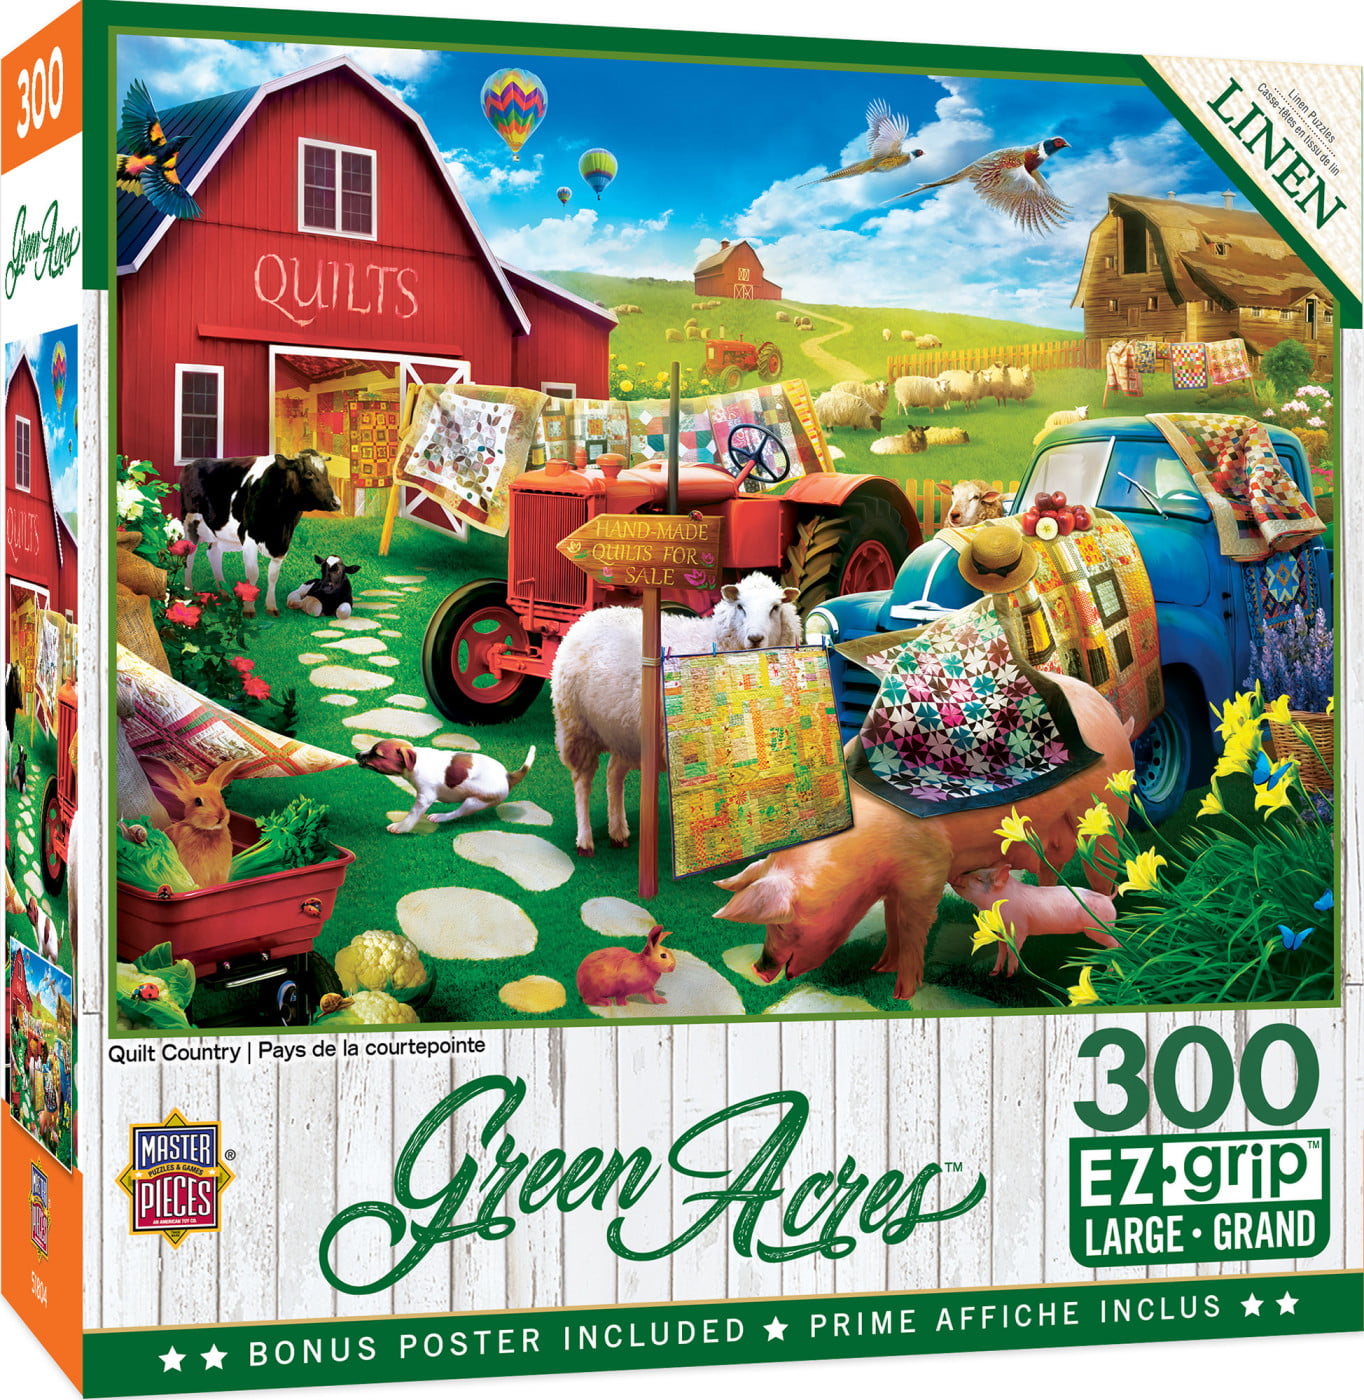 Jigsaw Puzzle Animal Farm Rooster Morning Glory 300 EZ Grip over sized piece NEW 